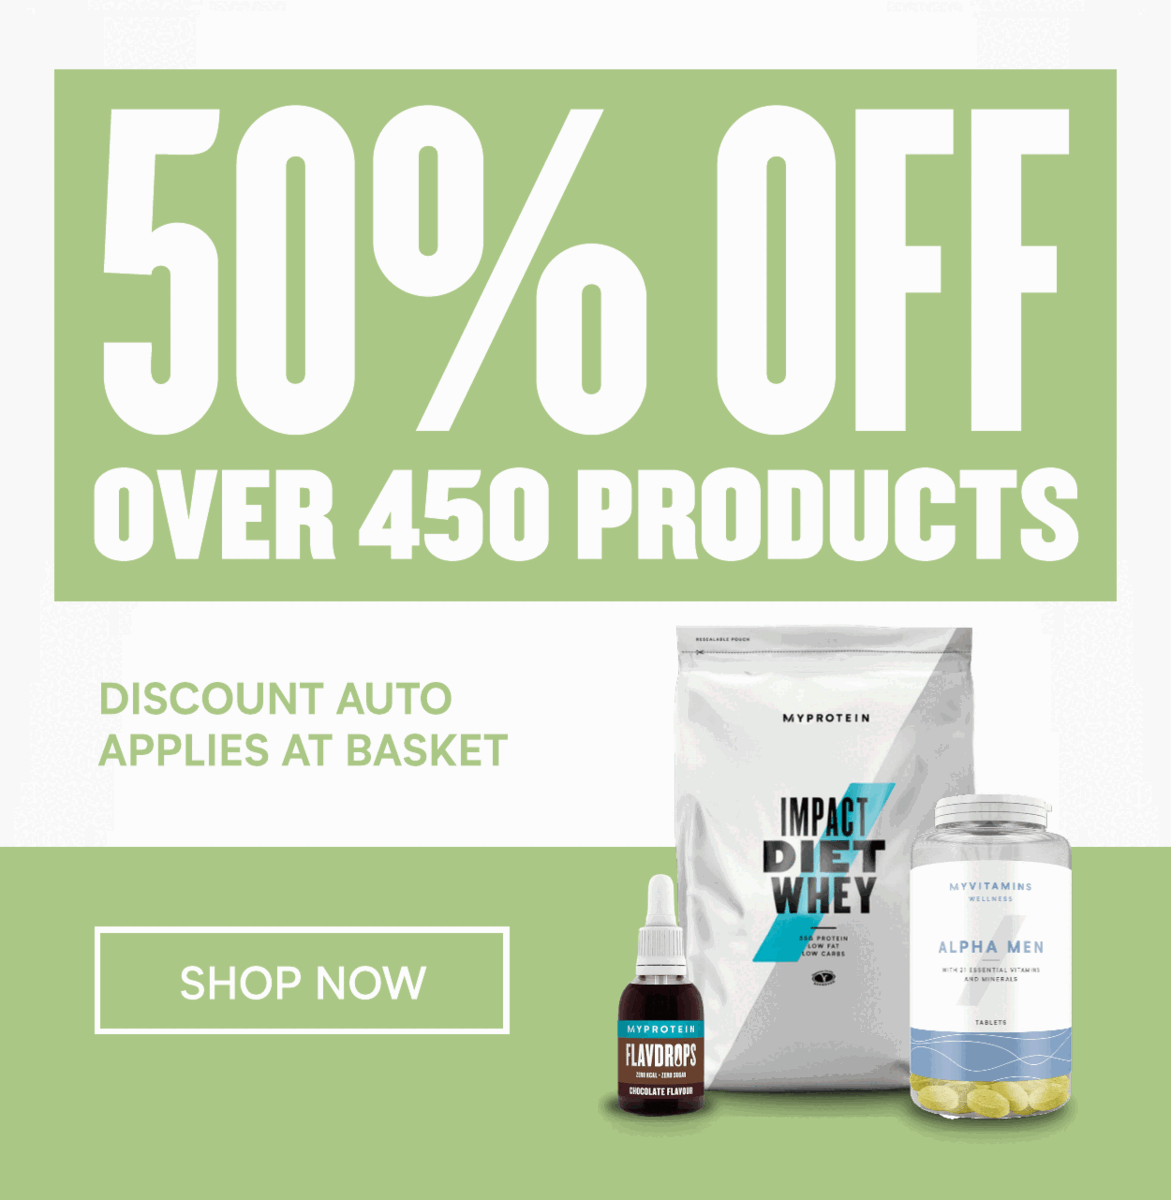 50% Off Over 450 Products